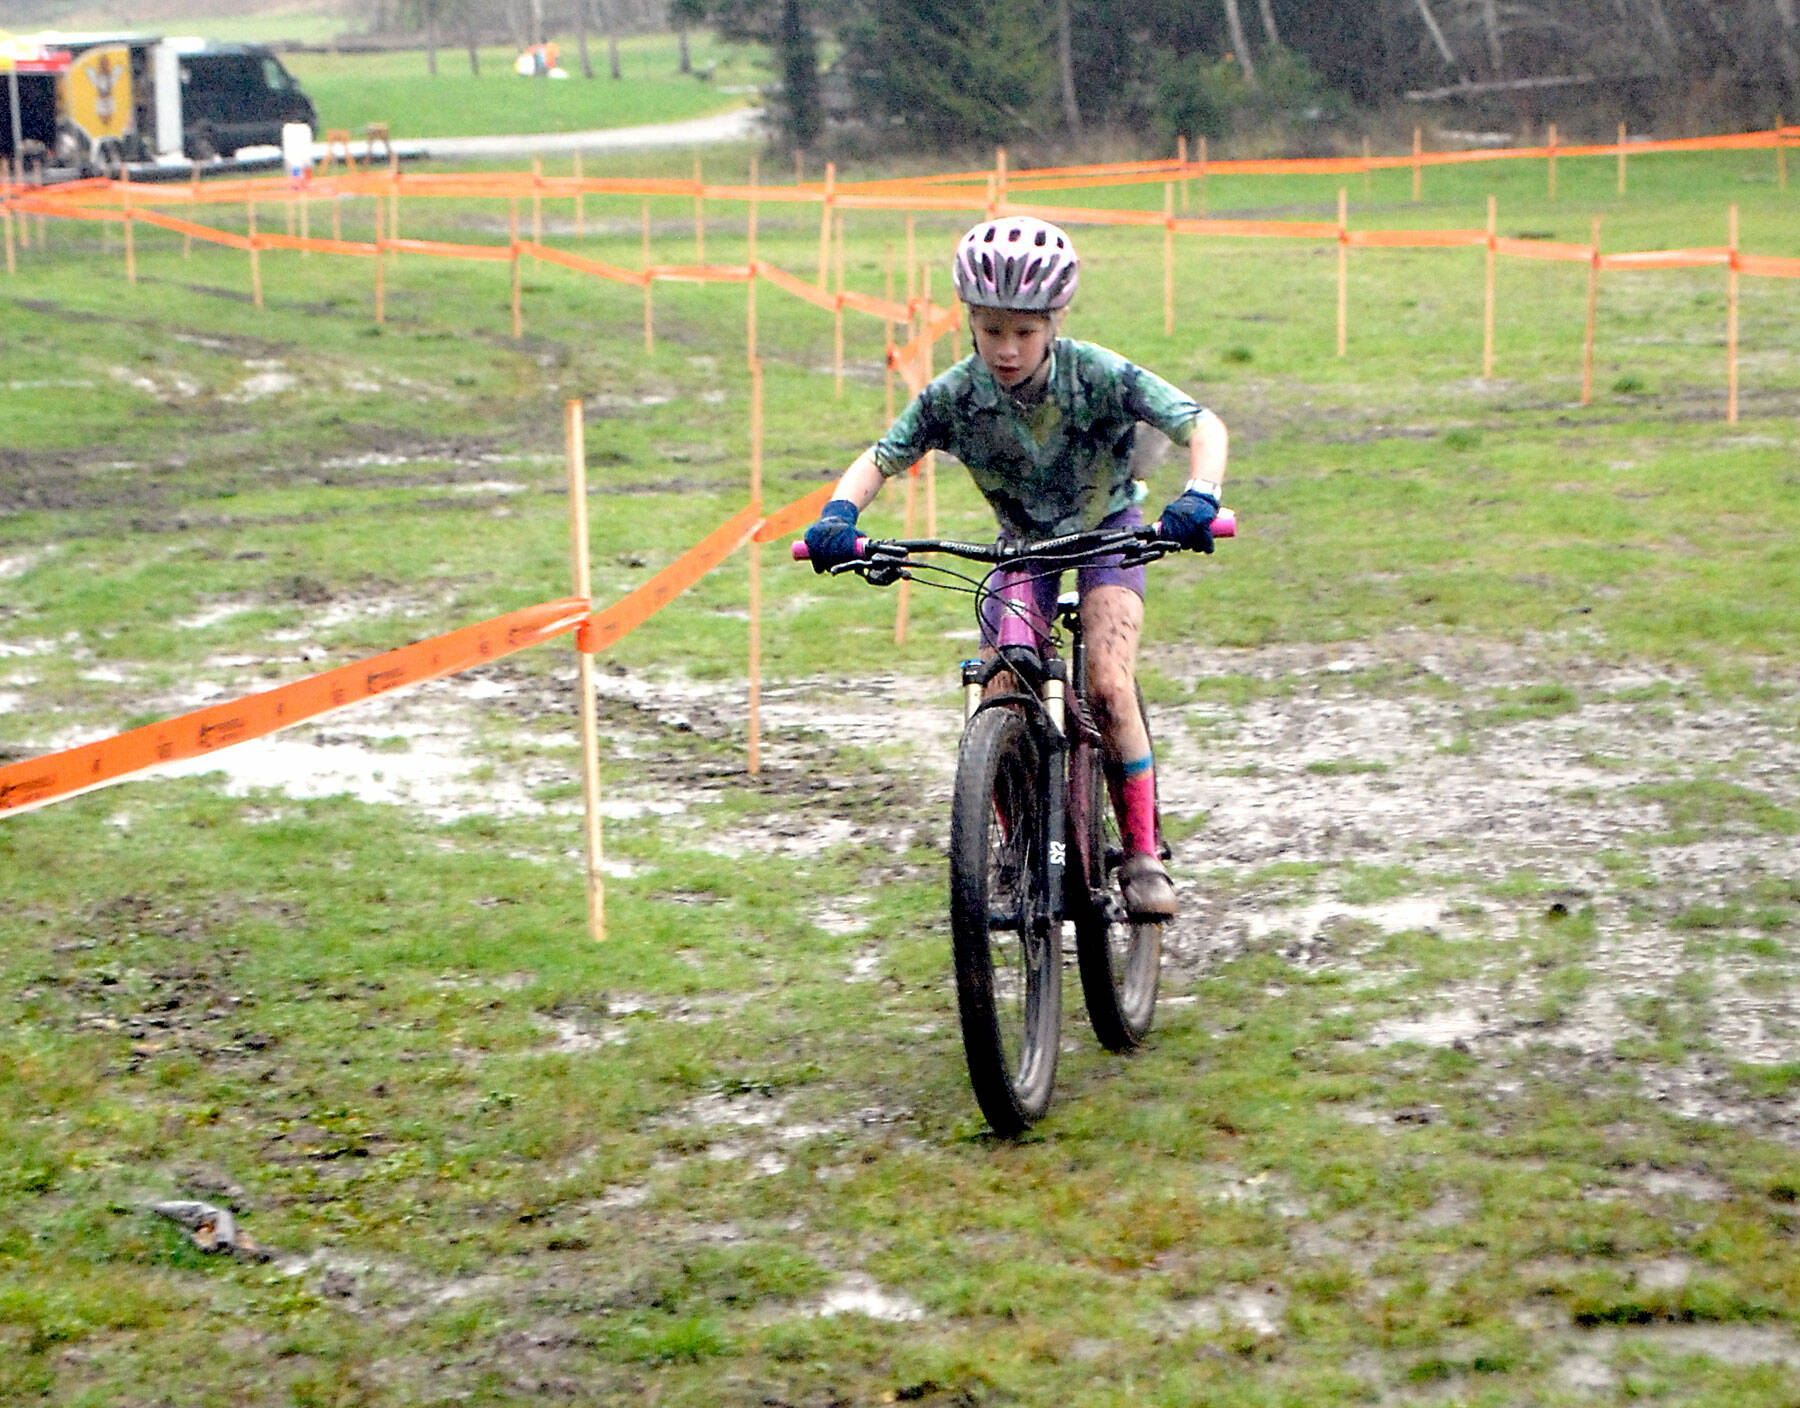 Eleanor Jones of Sequim races through a muddy bog at the Extreme Sports Park in Port Angeles on Nov. 28, as she competes in the the inaugural Extreme CX Port Angeles cyclocross event. Cyclocross, a popular sport in Europe, requires competitors to ride through mud, up steep hills and over obstacles and stairs. Riders often have to pick up their bikes and carry them through “portage” areas where the obstacles are too steep or the mud too slick to ride through. Riders from as young as 10 to as old as 65-plus competed in the late November event, with 94 riders on Nov. 27 and 104 riders the following day. Photo by Keith Thorpe/Olympic Peninsula News Group